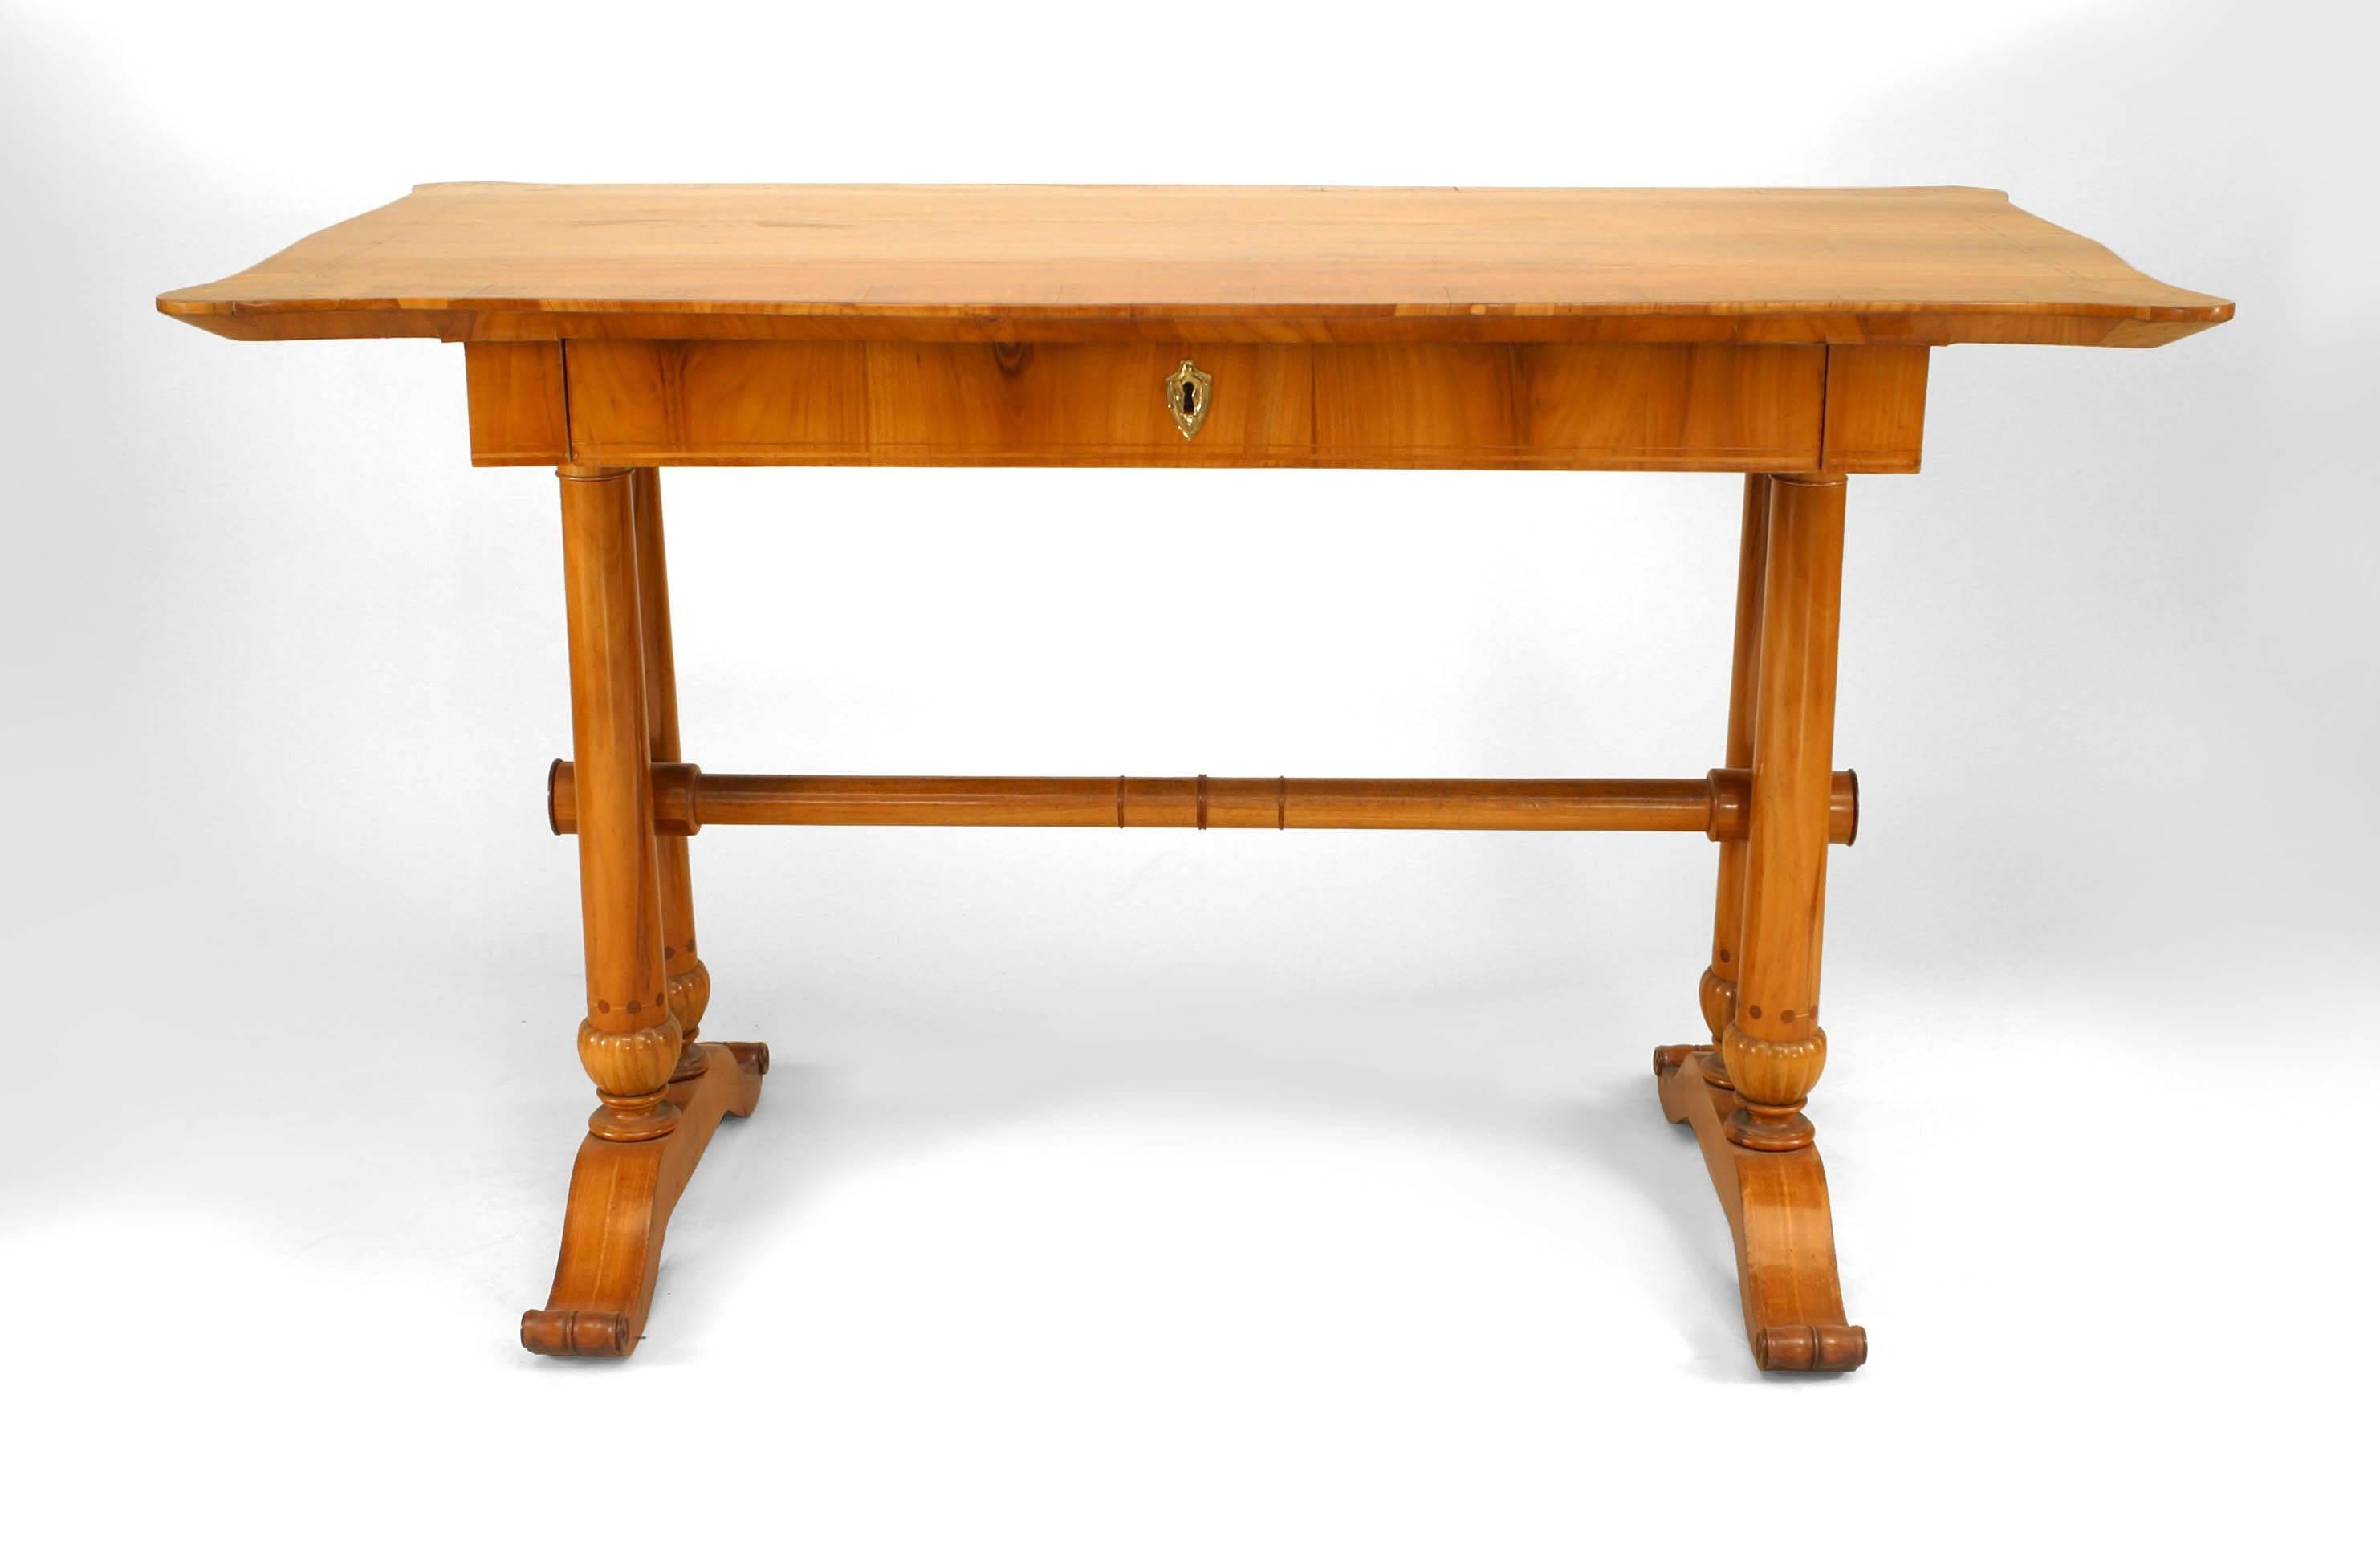 Austrian Biedermeier table desk composed of cherrywood and inlaid banding with a double pedestal base joined by a rod stretcher beneath a shaped rectangular top fitted with a single drawer.